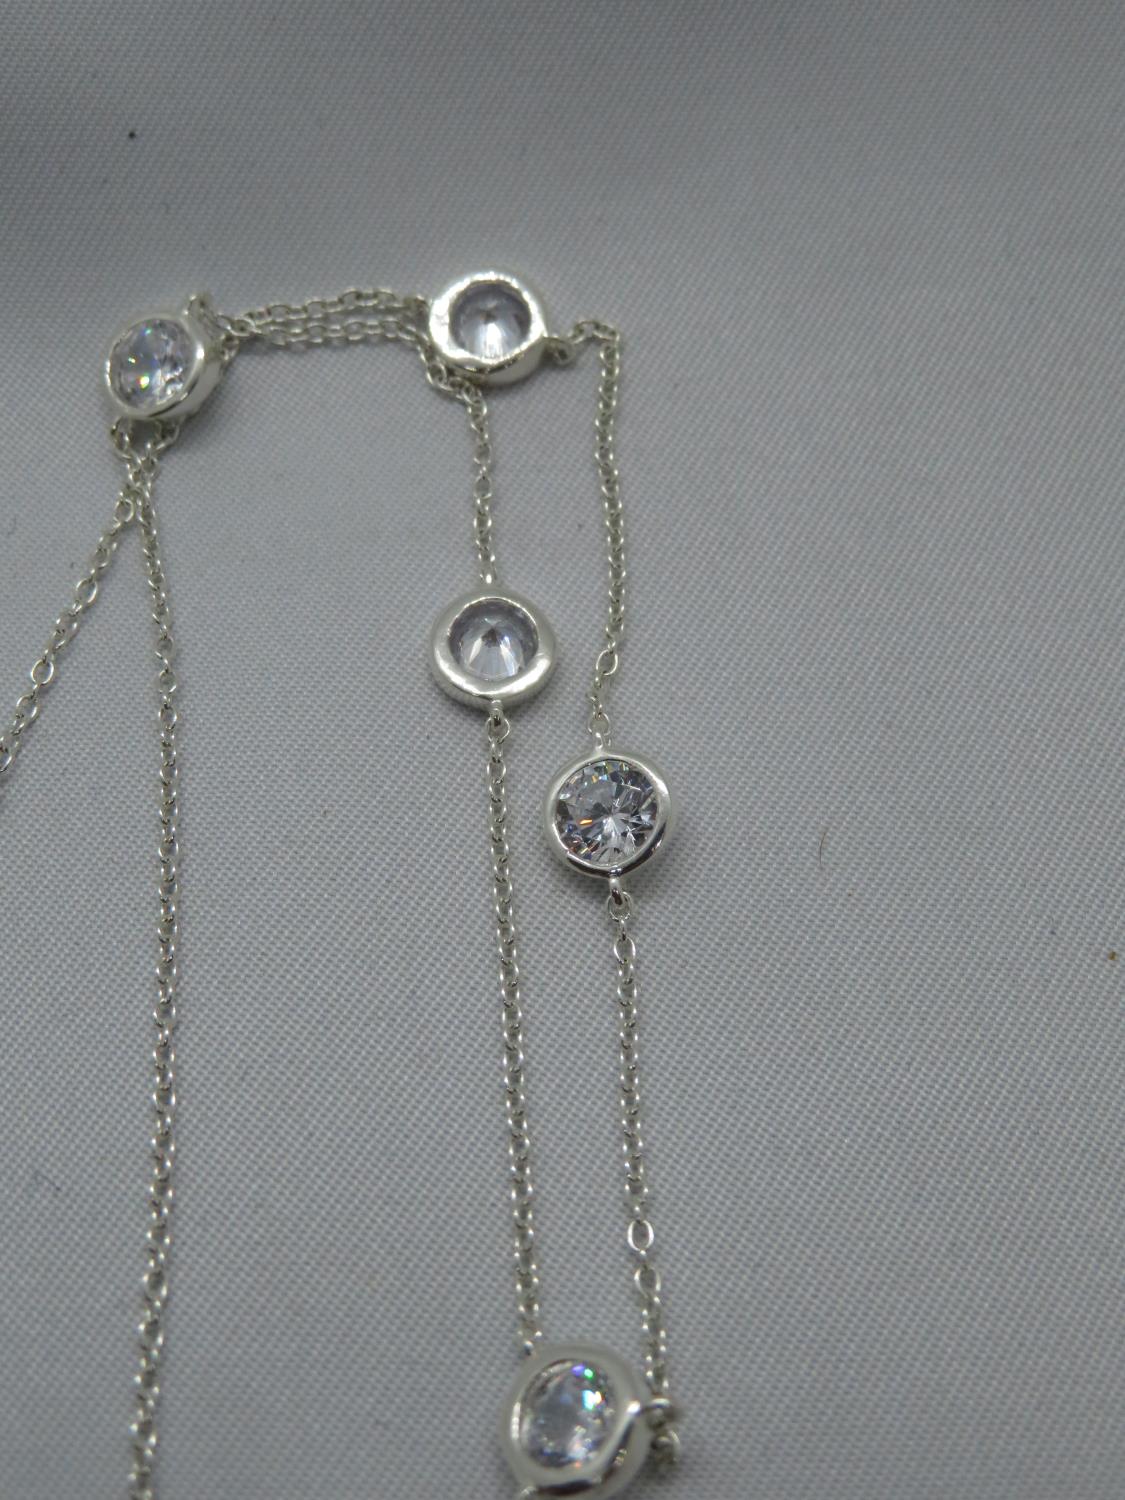 Silver chain set with white stones 18" - Image 2 of 2